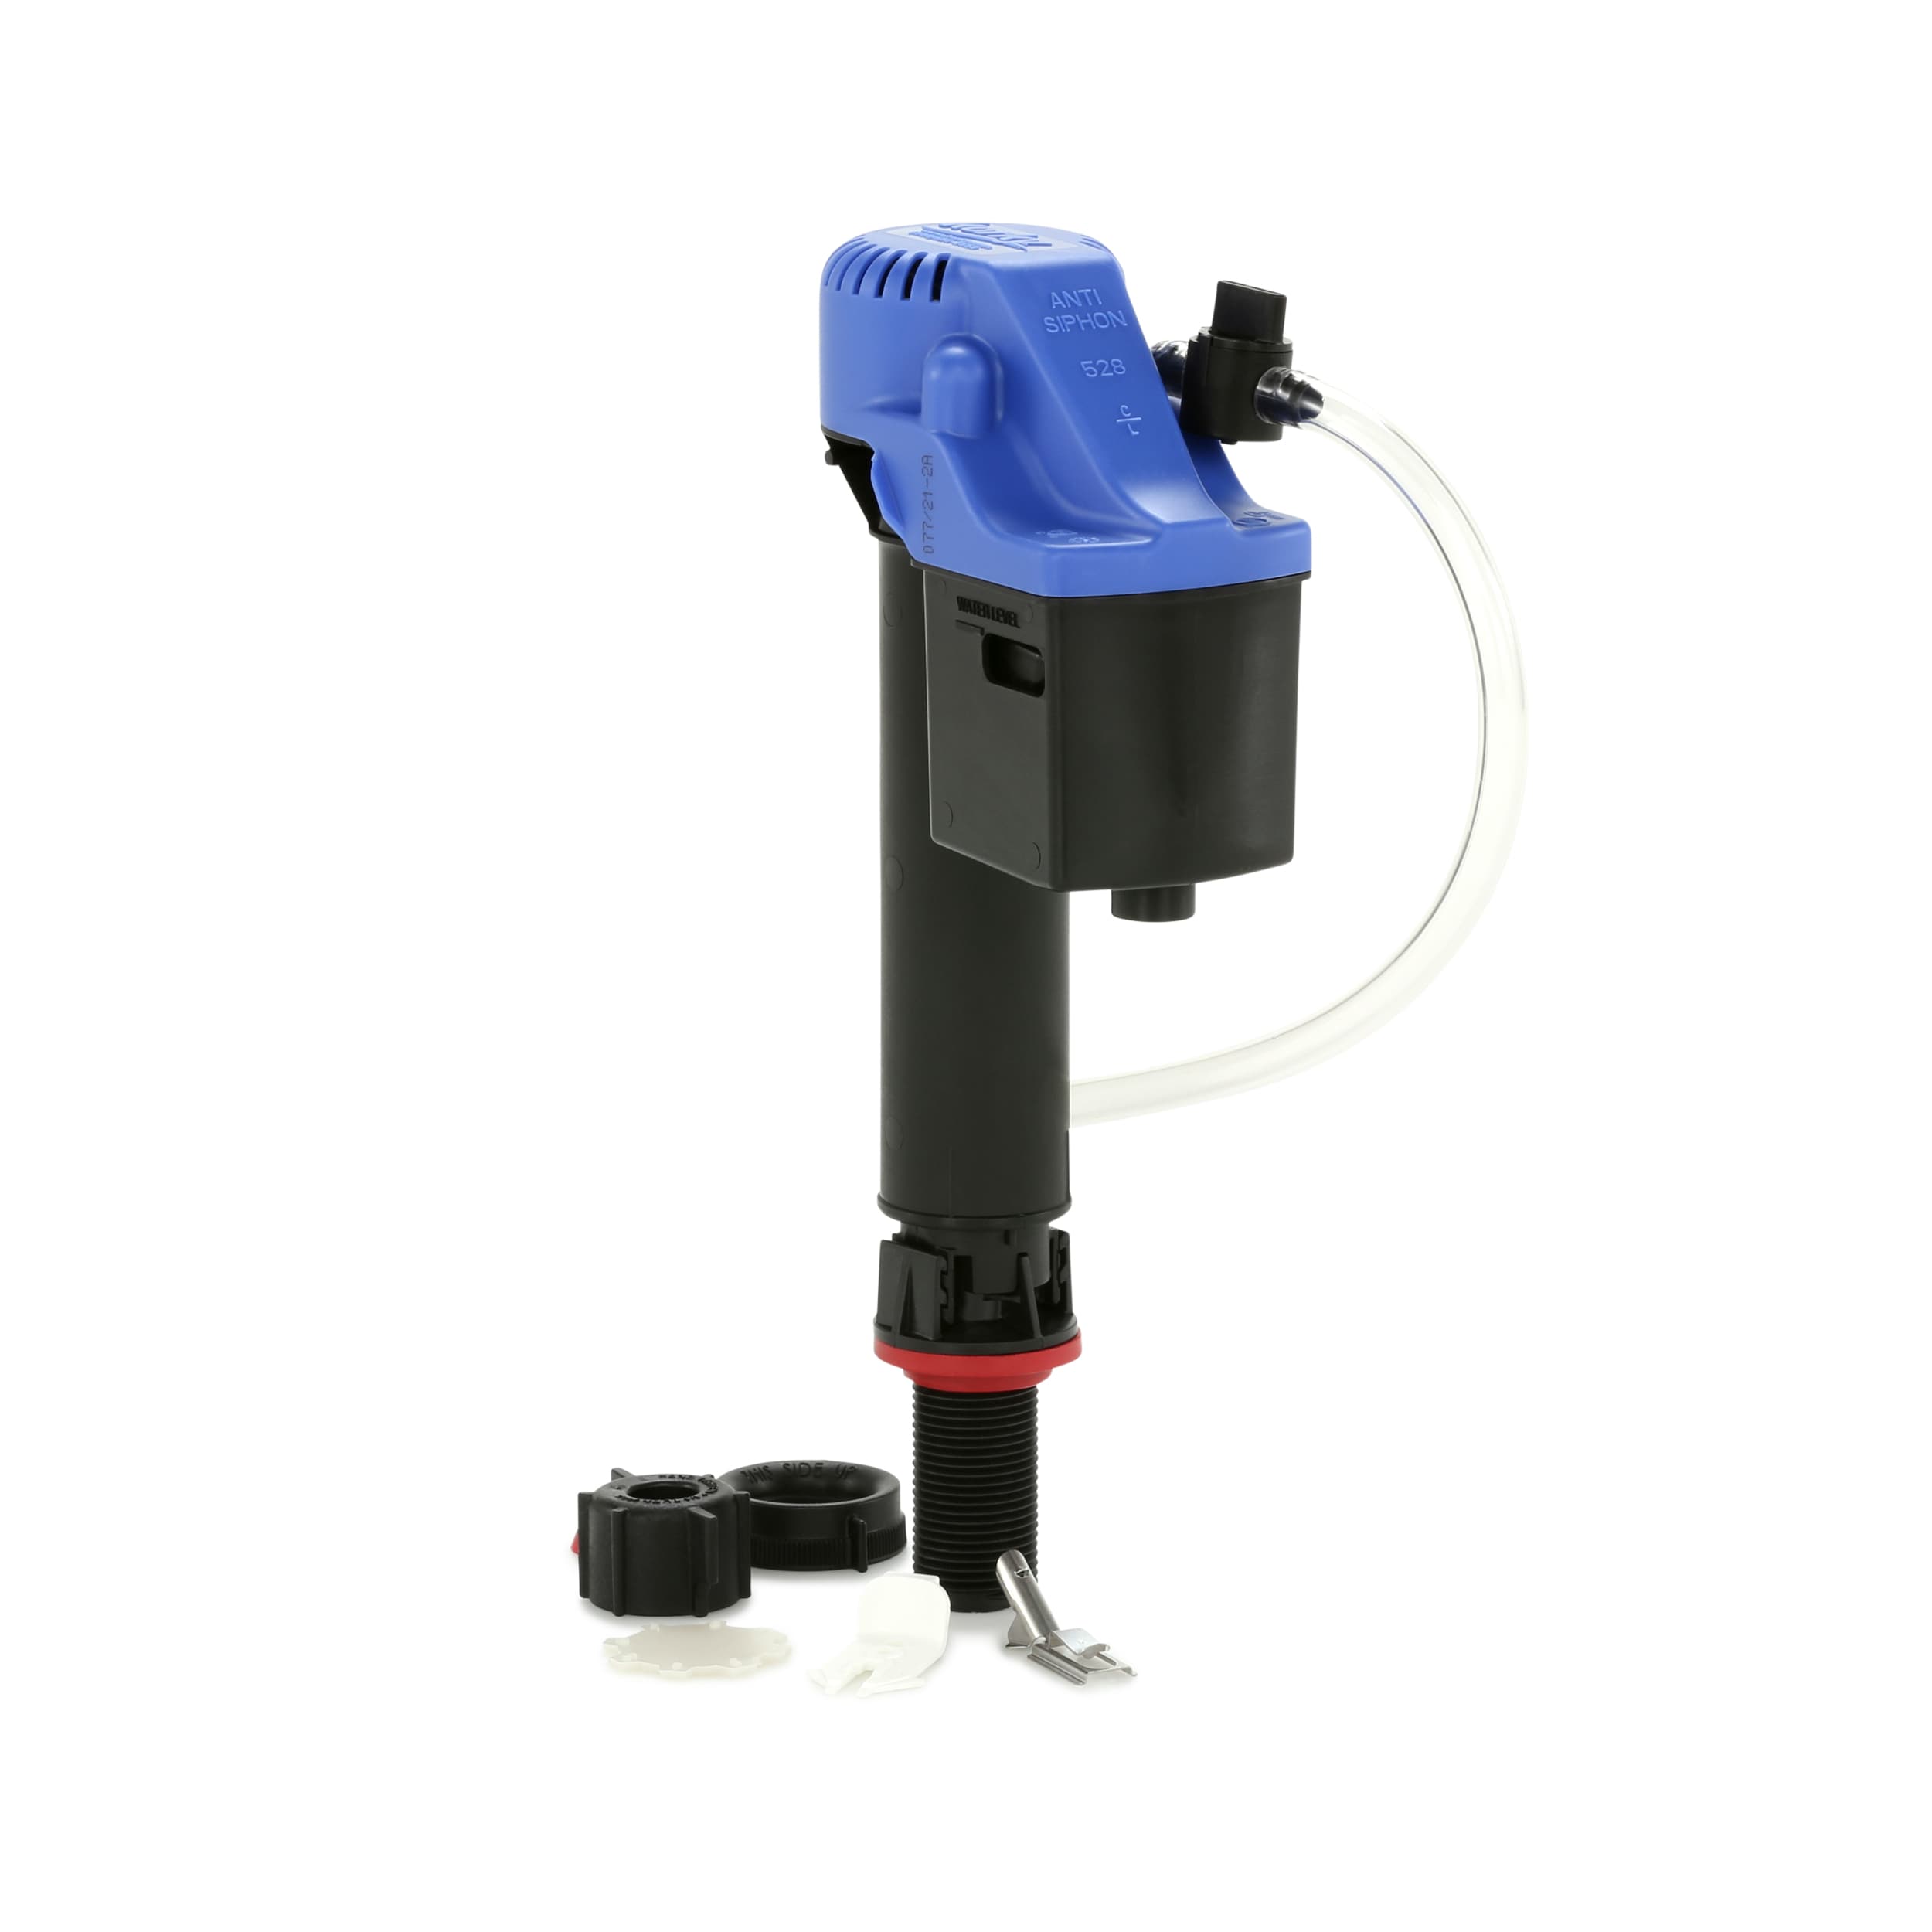 Korky 528GT Universal Fill Valve for Toto Toilets Blue for sale online 